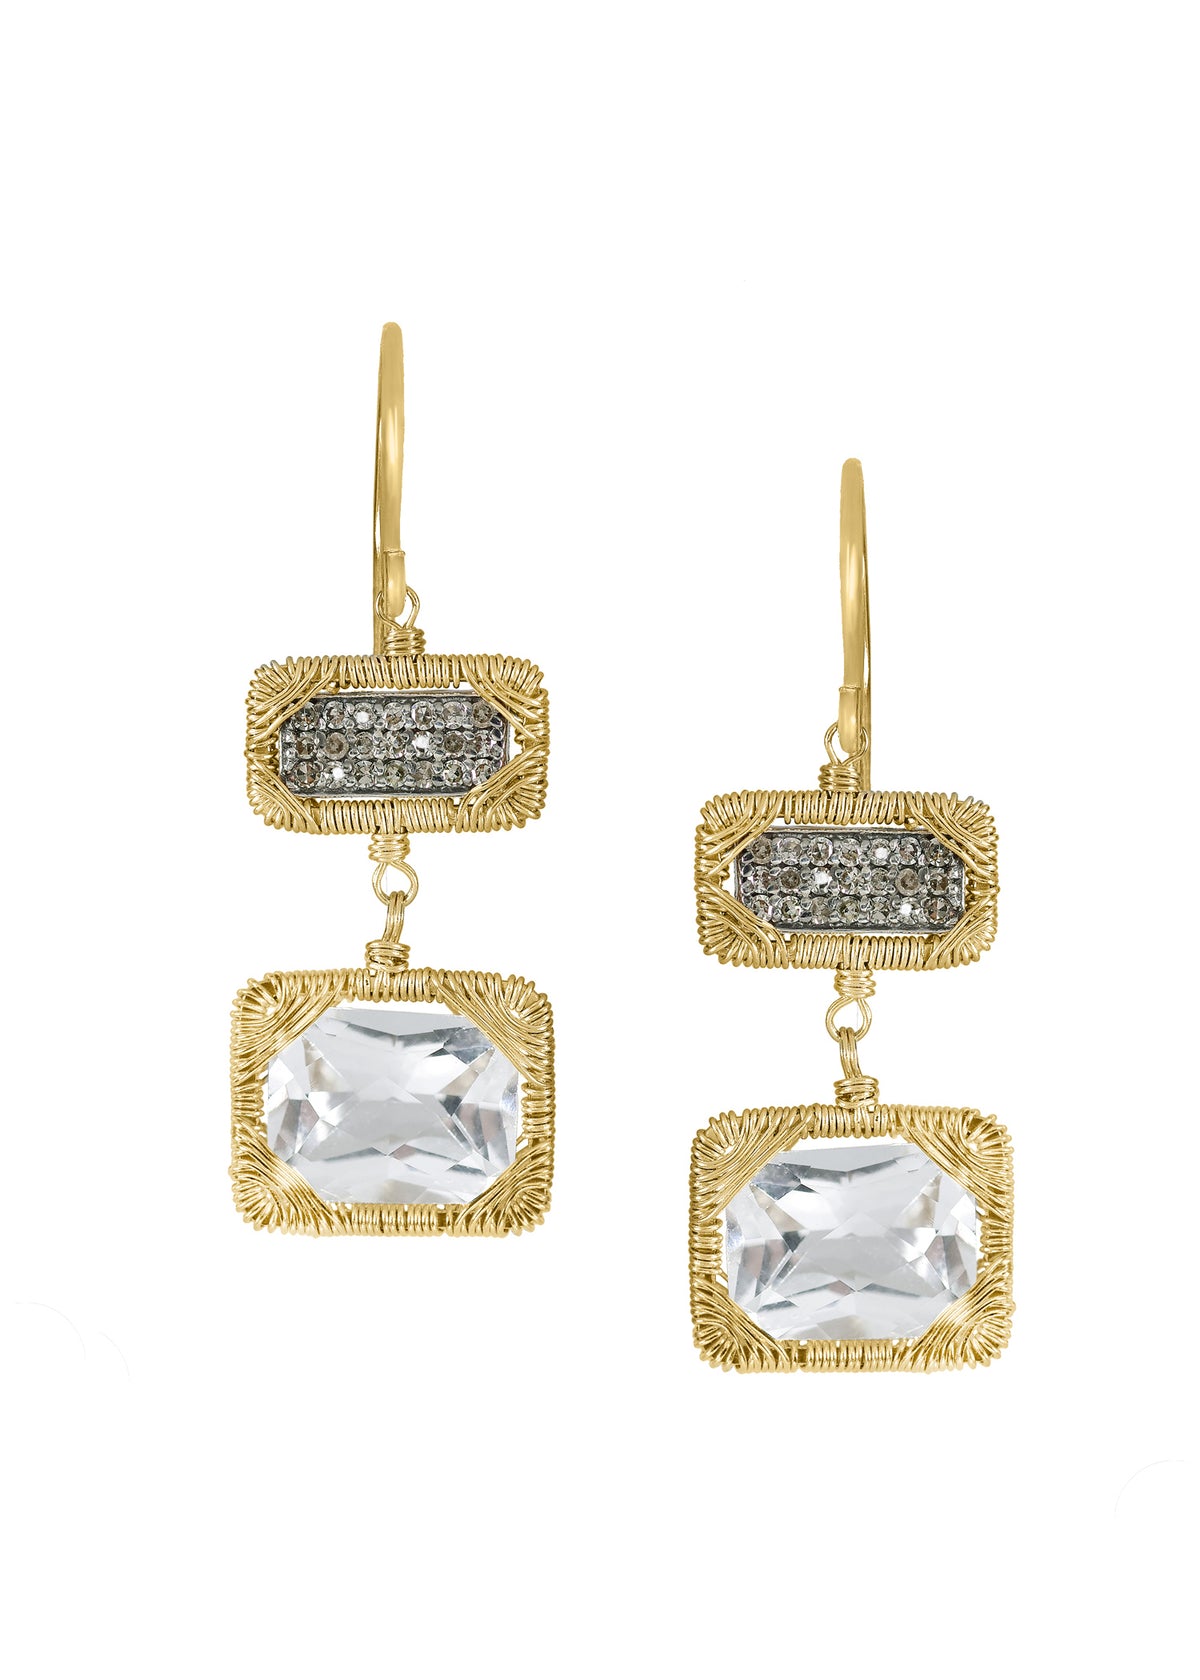 Diamond White topaz 14k gold Sterling silver Mixed metal Earrings measure 1-1/4&quot; in length (including the ear wires) and 7/16&quot; in width at the widest point Handmade in our Los Angeles studio